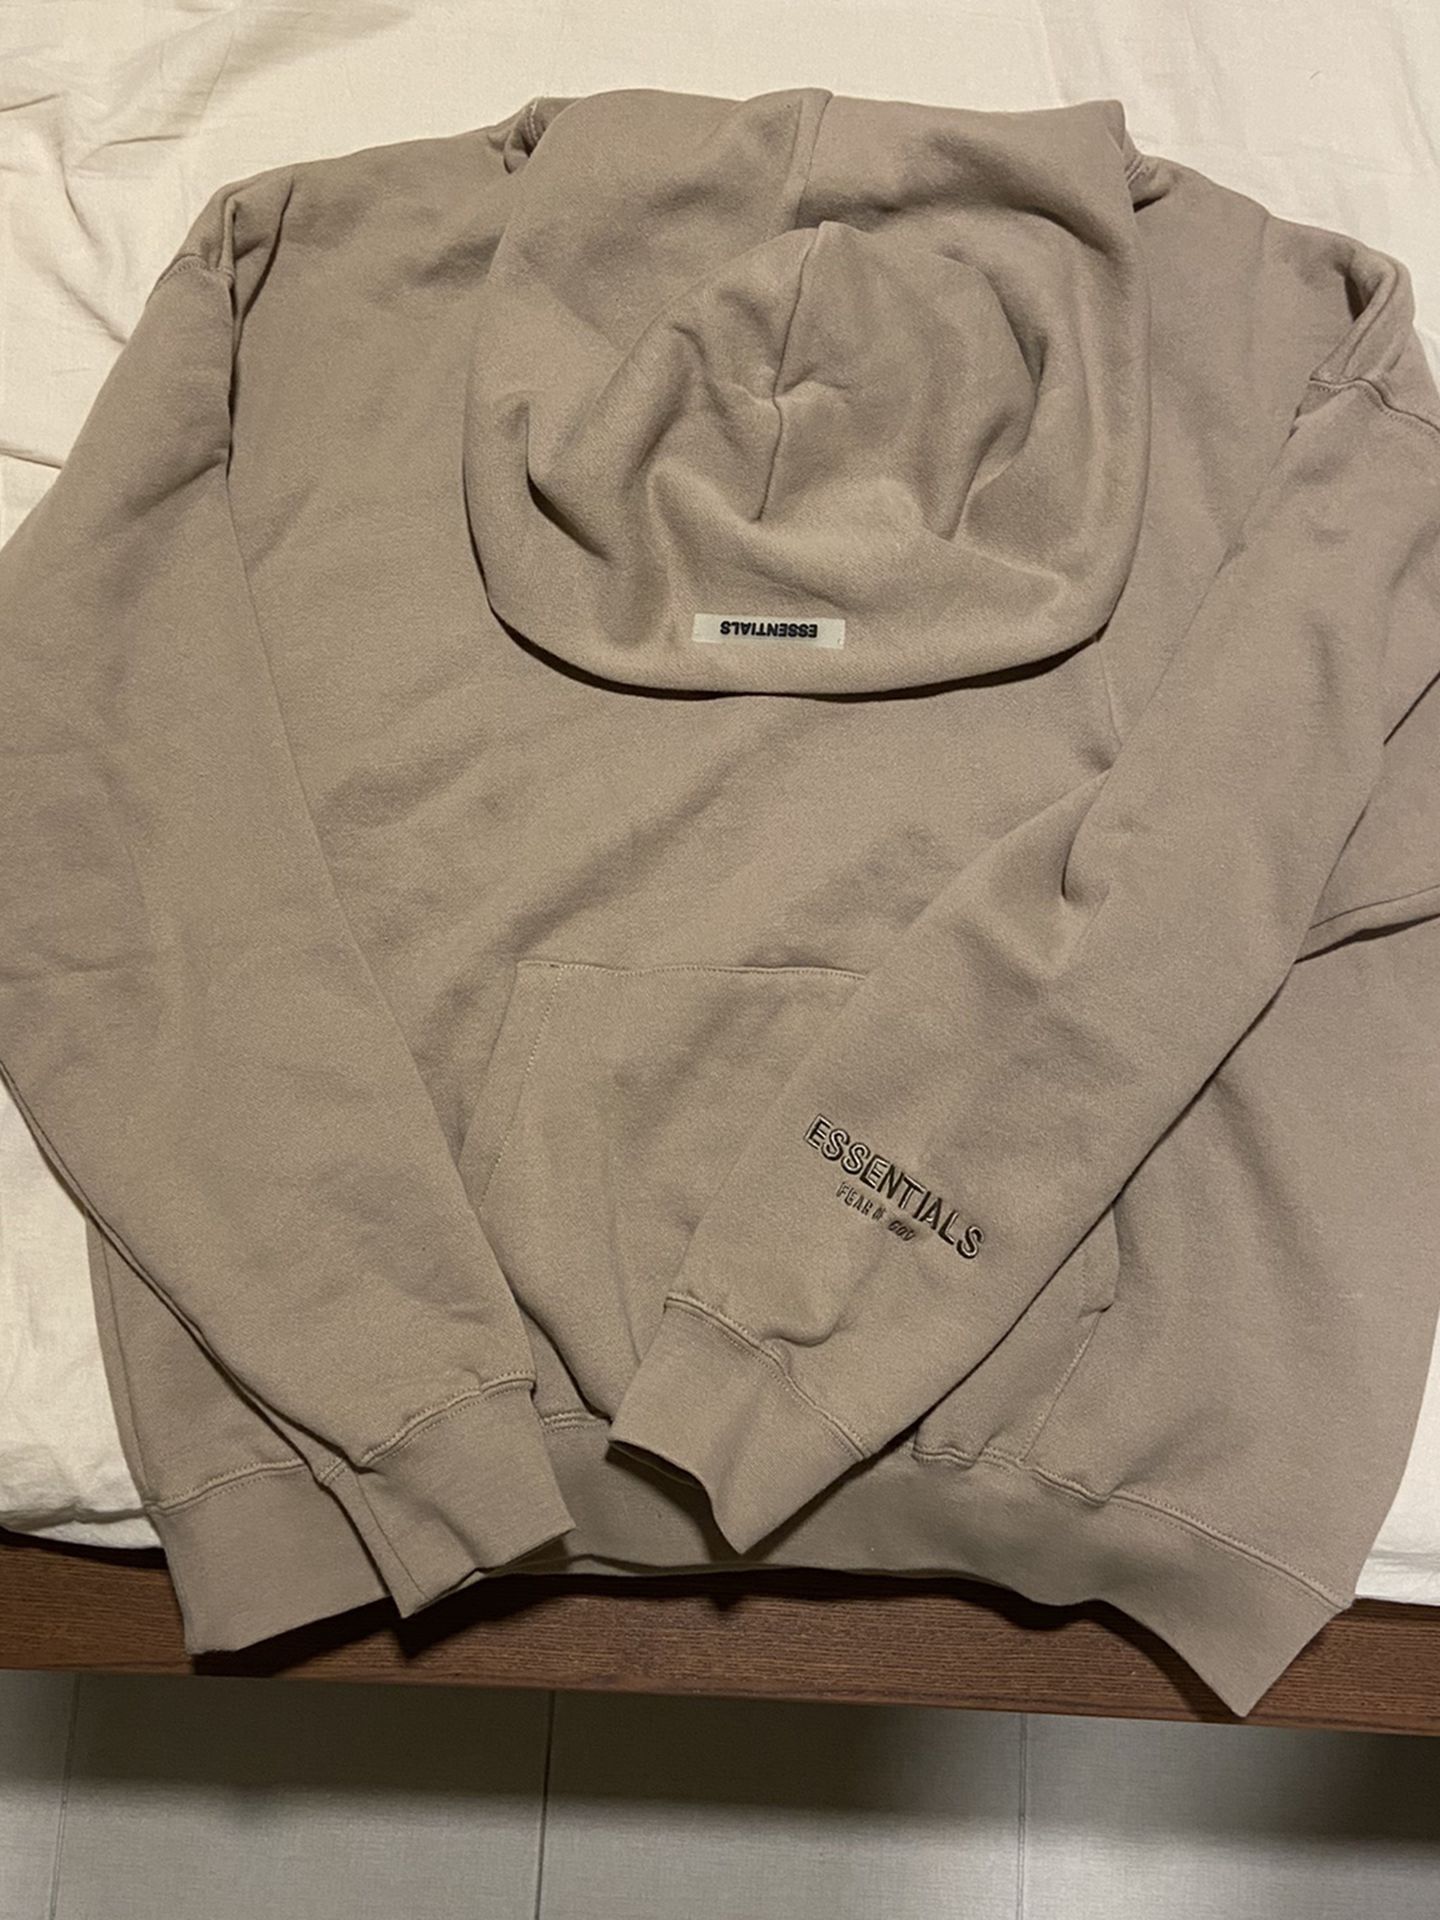 FOG Tan Pullover Hoodie Size M